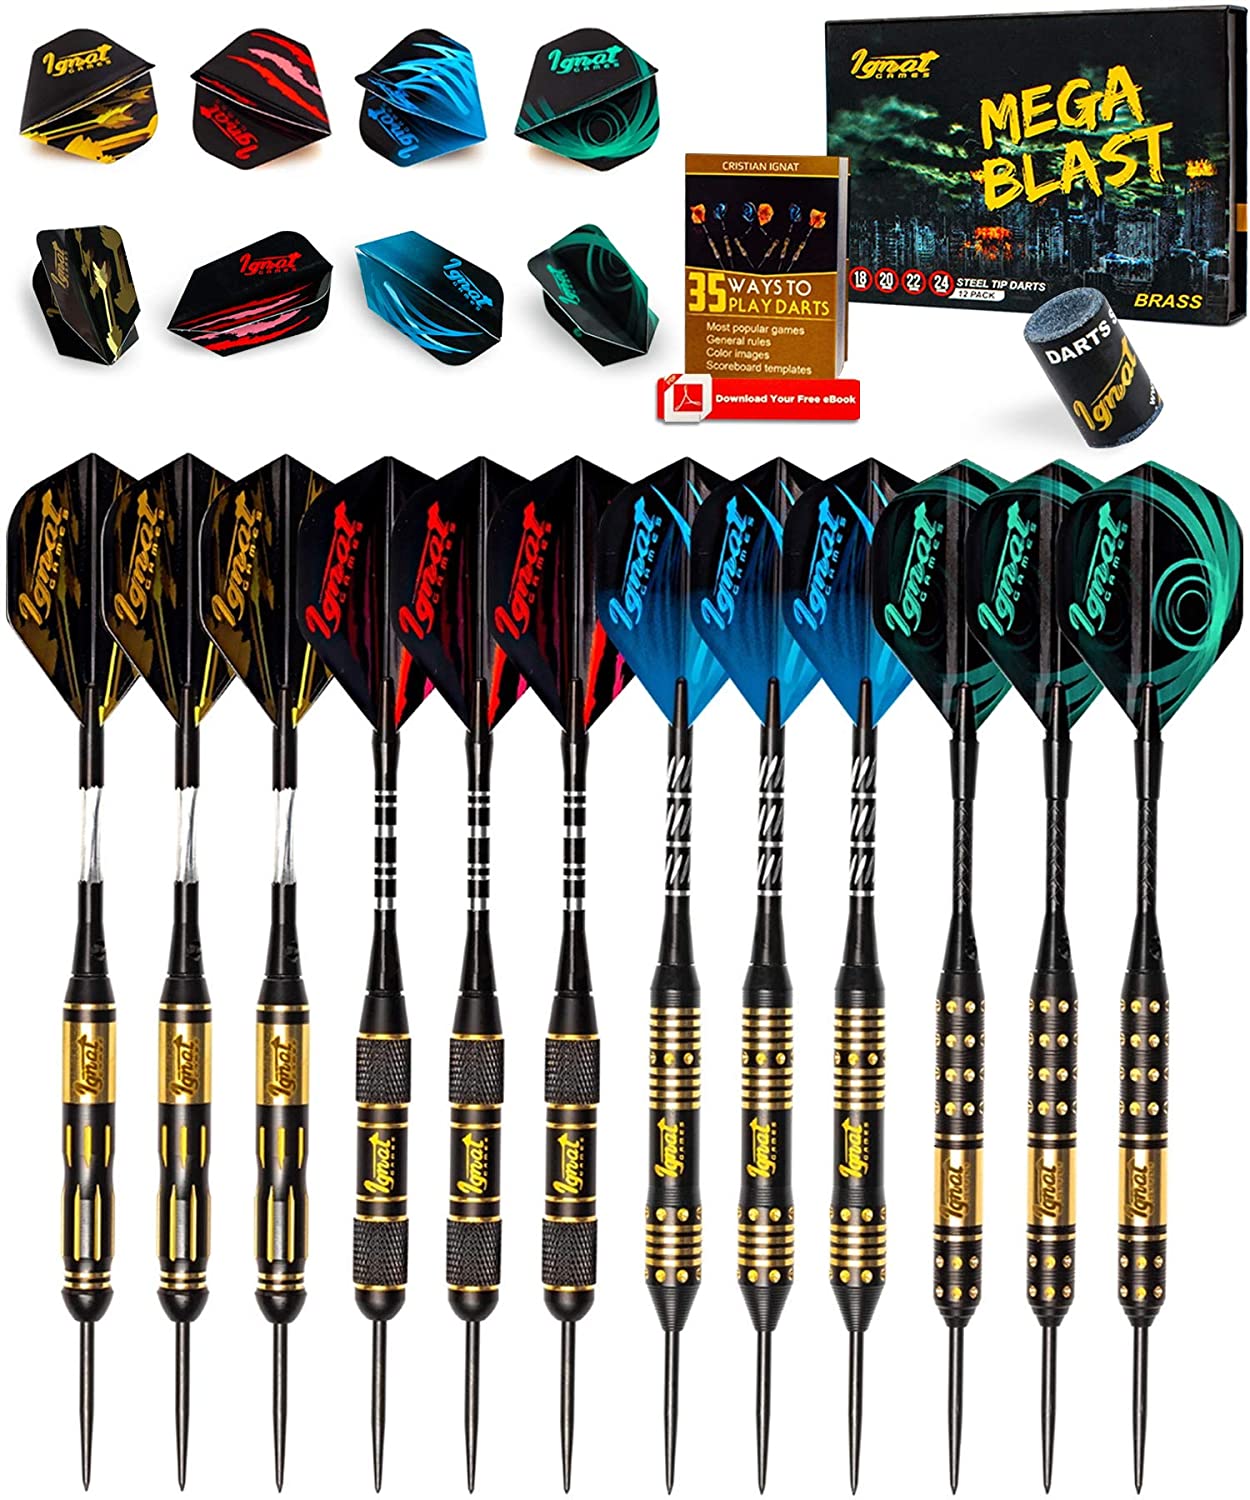 IgnatGames Steel Tip Darts Set - Professional Darts with Aluminum Shafts, Rubber O'Rings, and Extra Flights + Dart Sharpener + Innovative Case + Darts Guide (Tungsten or Brass)